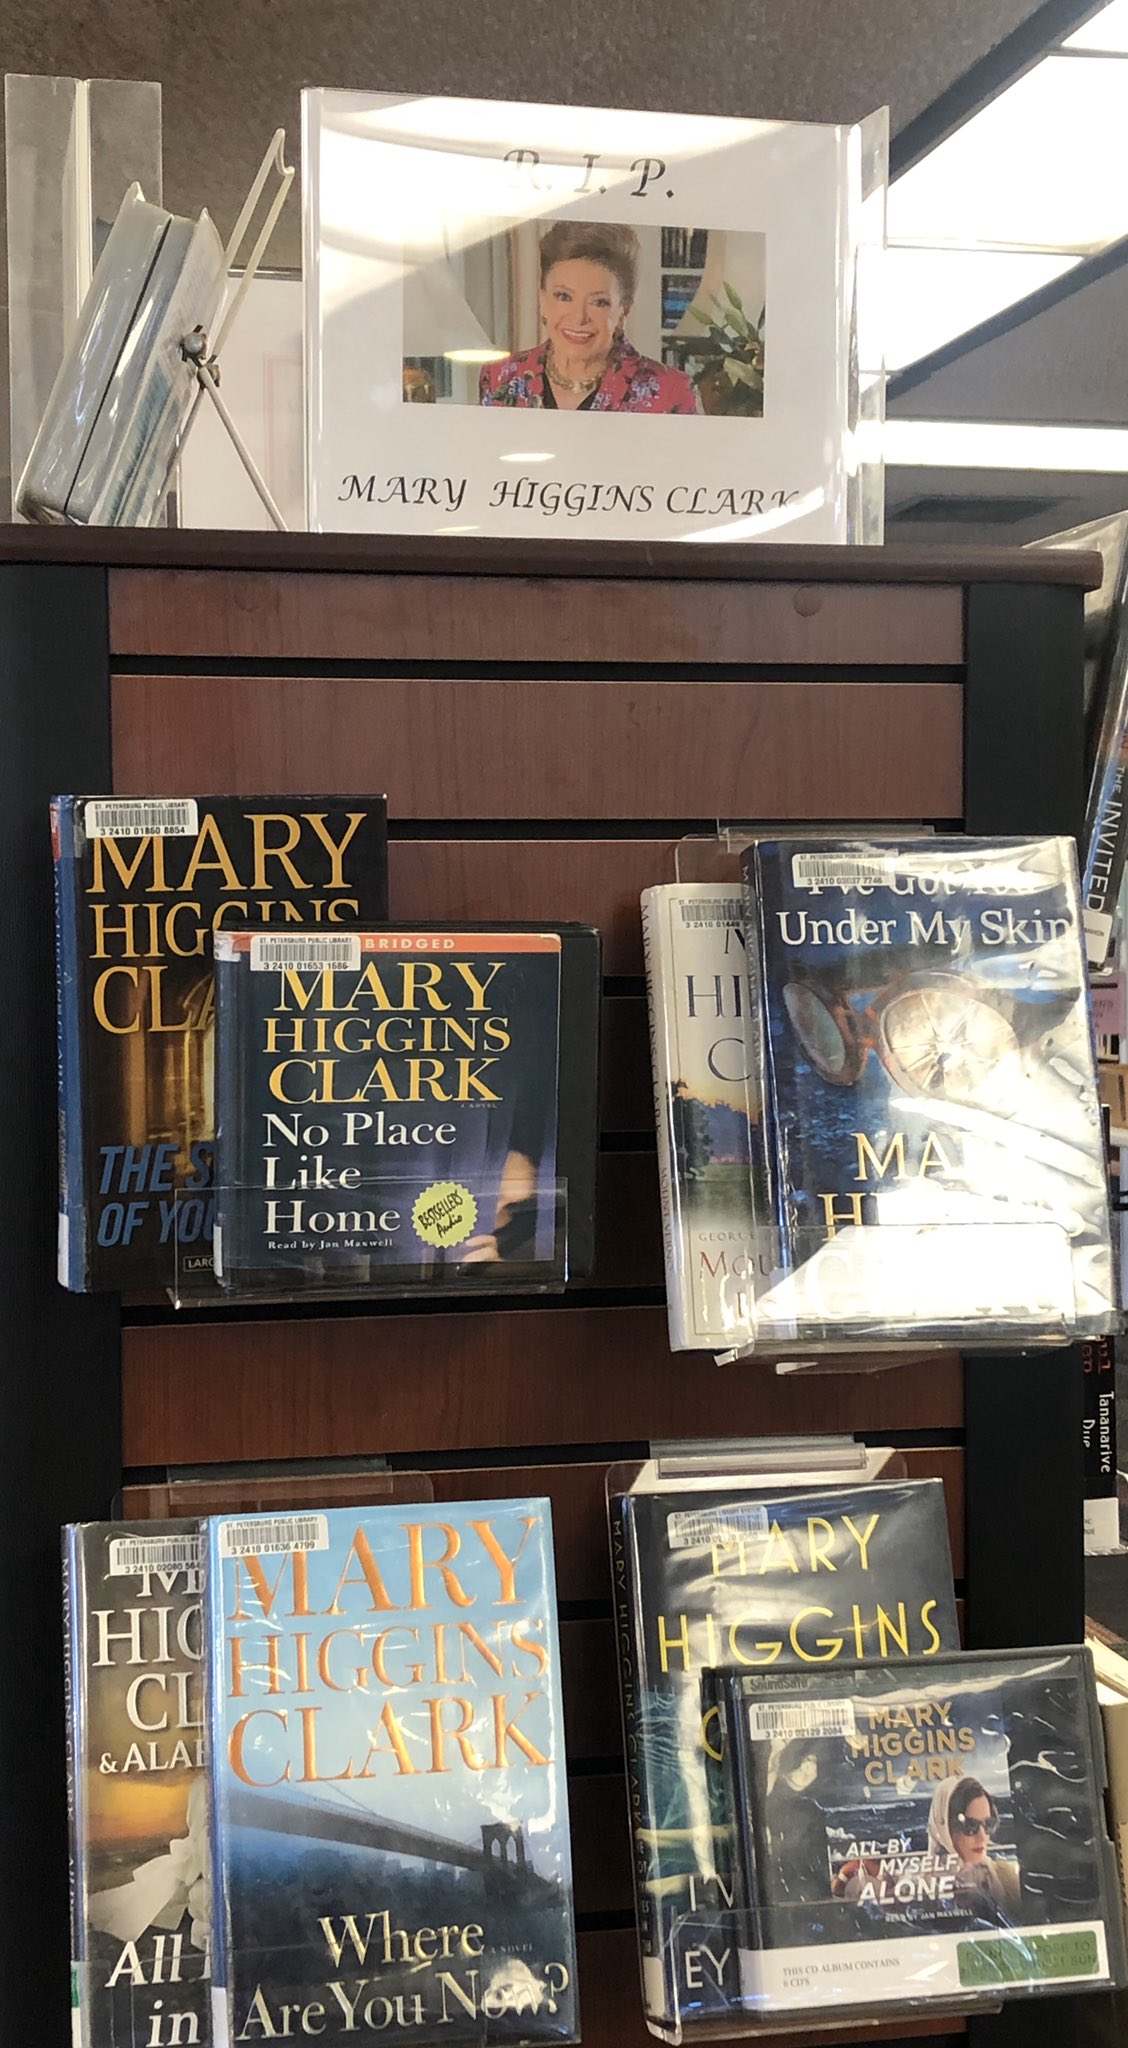 Memorial book display for Mary Higgins Clark who passed away in 2020